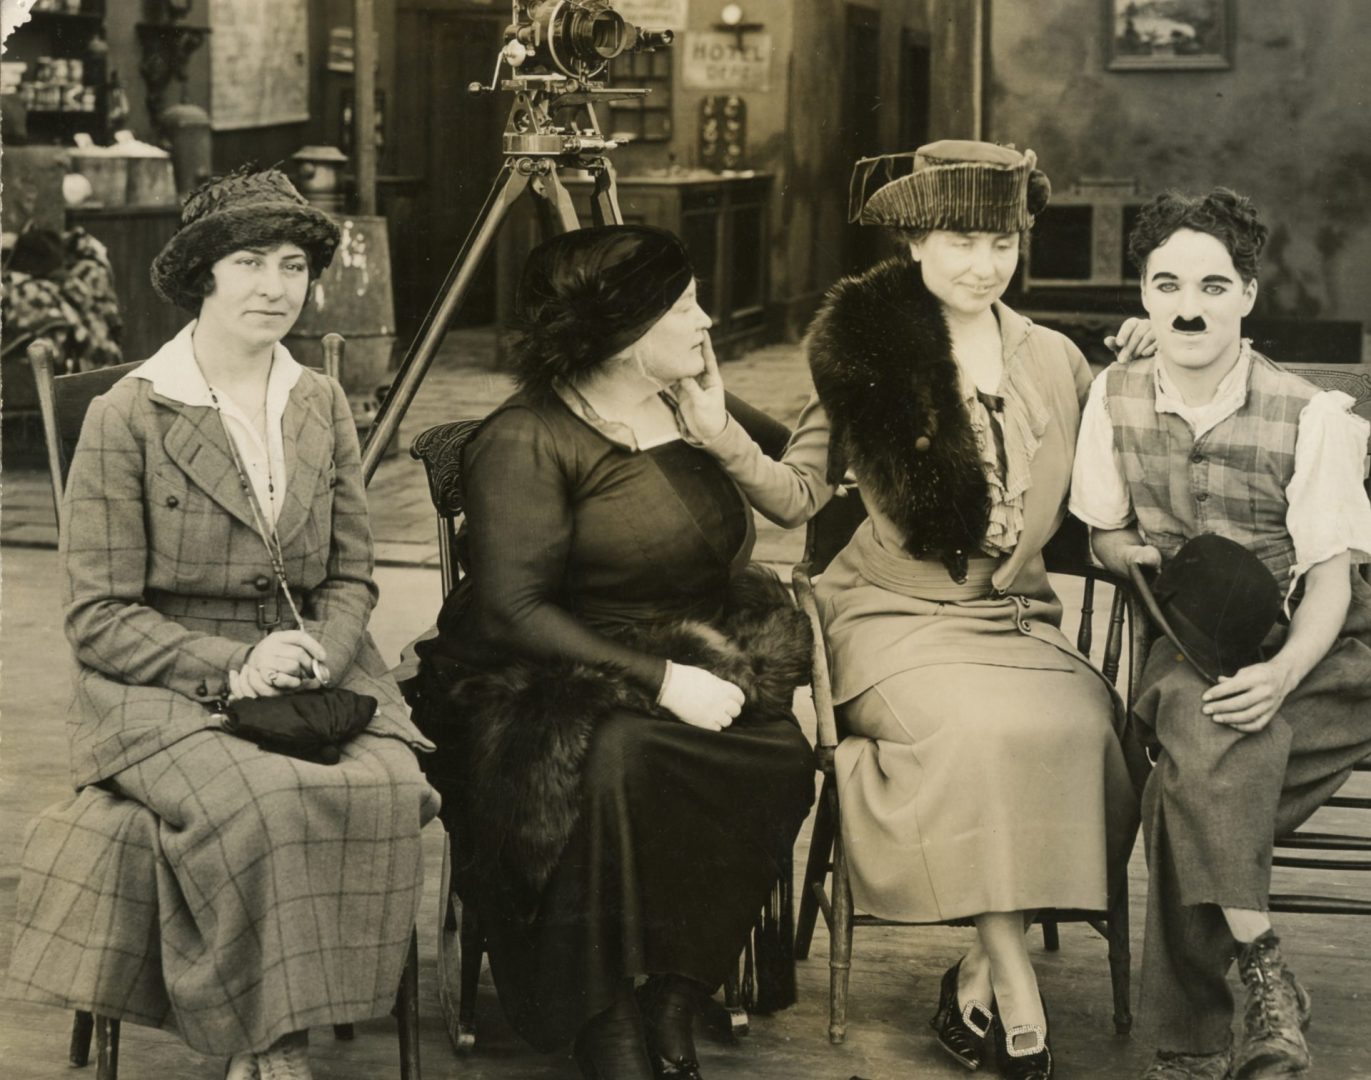 Polly Thomson in a plaid suit and a brimmed hat; Anne Sullivan wearing a black dress and a feathered hat; Helen Keller wearing a light suit, fur stole, and cocked hat; and actor Charlie Chaplain wearing loose pants and a plaid vest. He wears white face makeup and his trademark short mustache and holds a bowler hat in his lap. Keller’s left hand rests easily on Chaplain’s shoulder. Her right hand has two fingers on Sullivan’s lips, and her right thumb rests under Sullivan’s chin. A hand-cranked motion picture camera on a tripod is in the background.